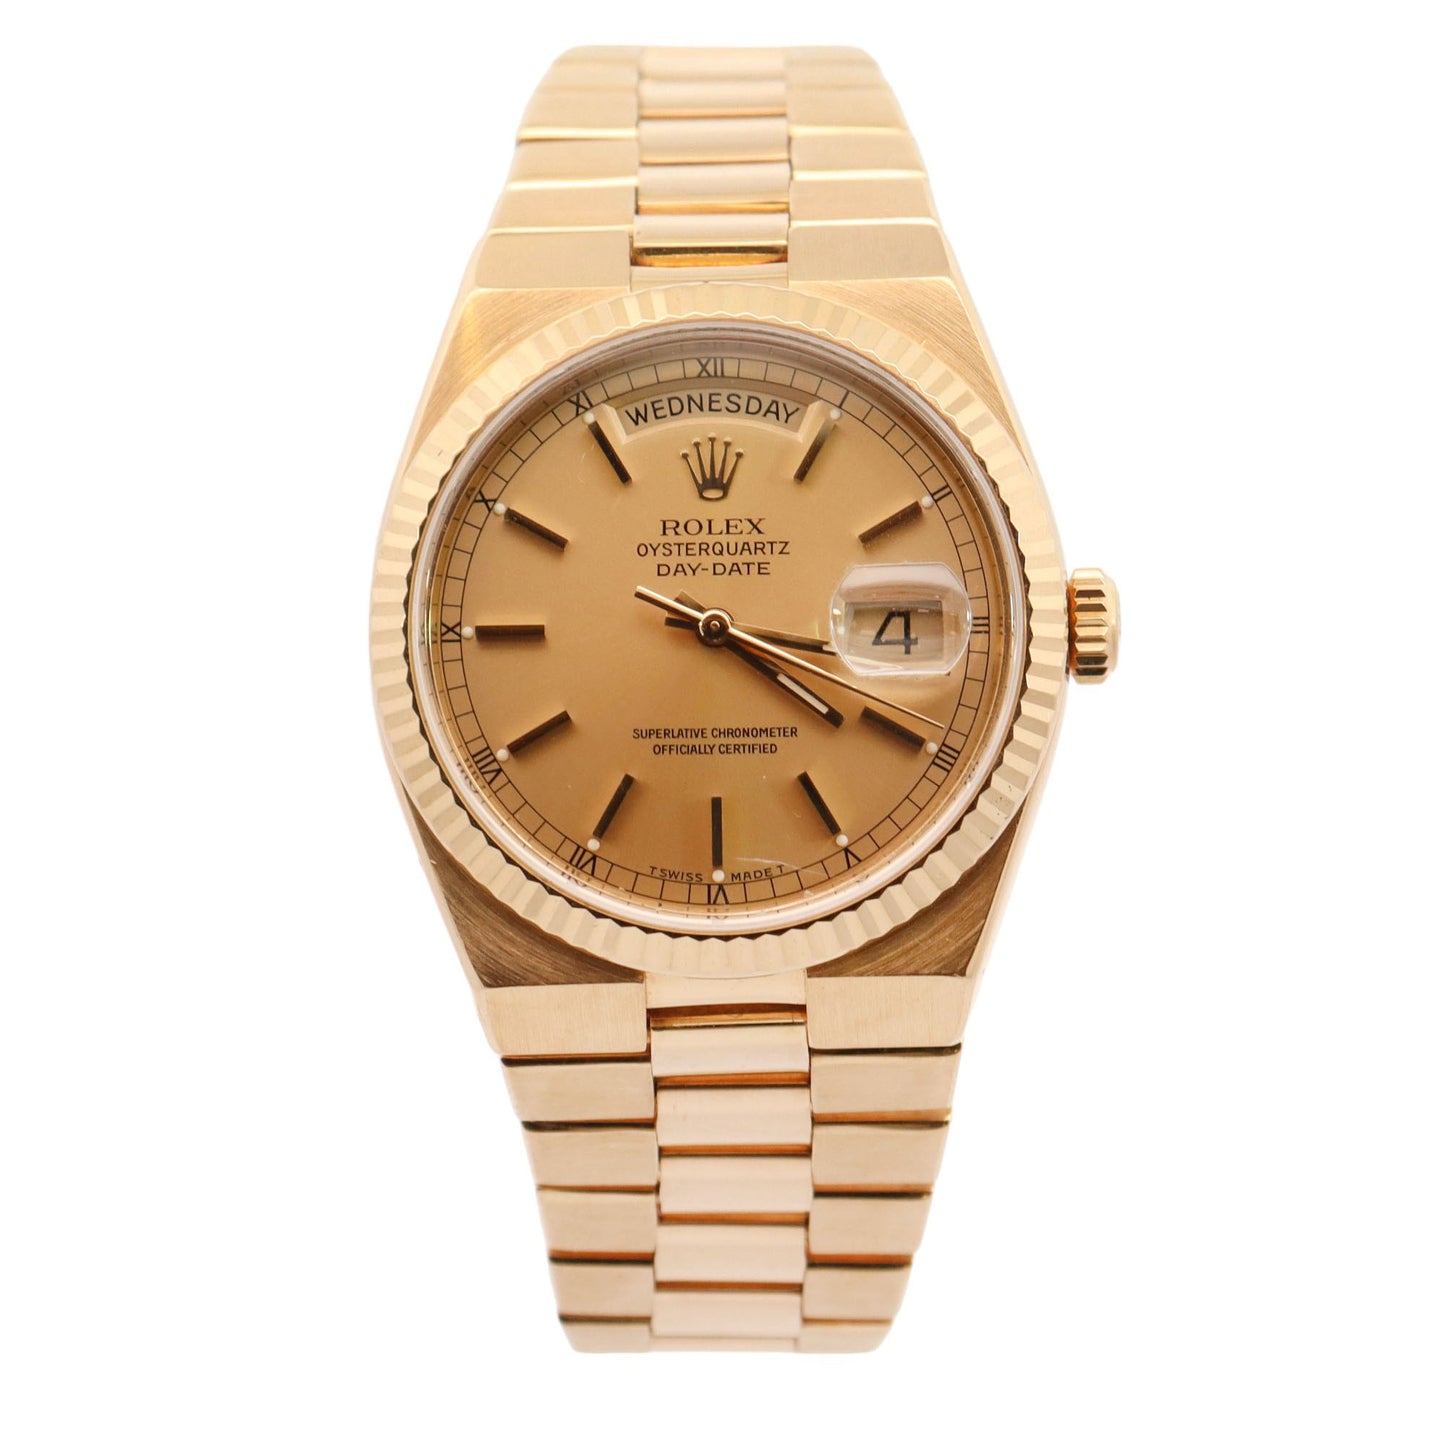 Rolex Oysterquartz Day-Date Yellow Gold 36mm Champagne Stick Dial Watch Reference# 19018 - Happy Jewelers Fine Jewelry Lifetime Warranty